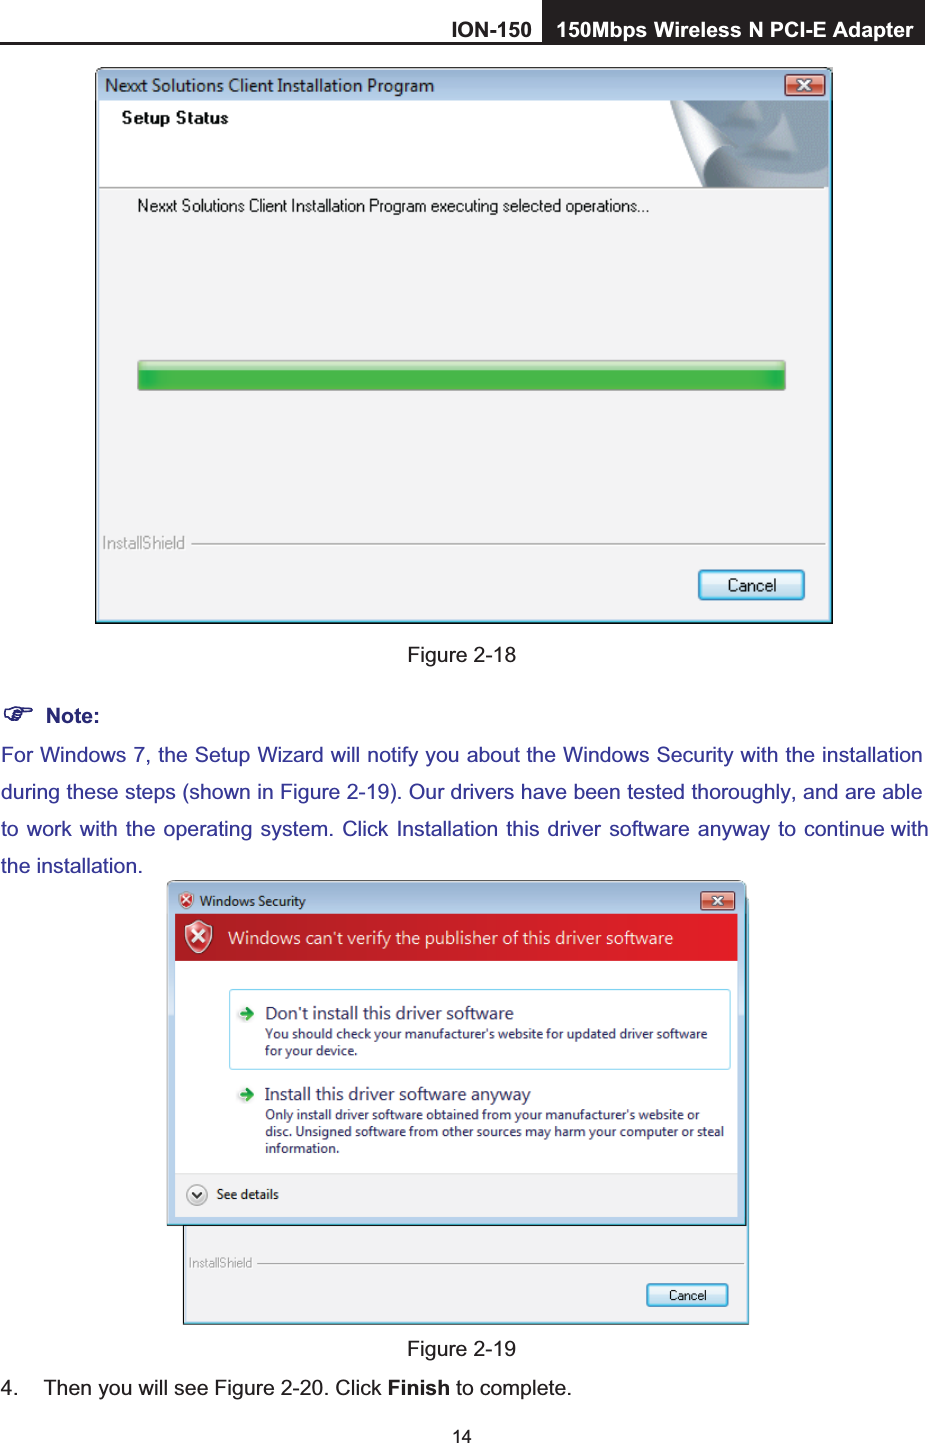 14Figure 2-18 Note:For Windows 7, the Setup Wizard will notify you about the Windows Security with the installation during these steps (shown in Figure 2-19). Our drivers have been tested thoroughly, and are able to work with the operating system. Click Installation this driver software anyway to continue withthe installation.Figure 2-19 4.  Then you will see Figure 2-20. Click Finish to complete. ION-150 150Mbps         Wireless         N PCI-E Adapter